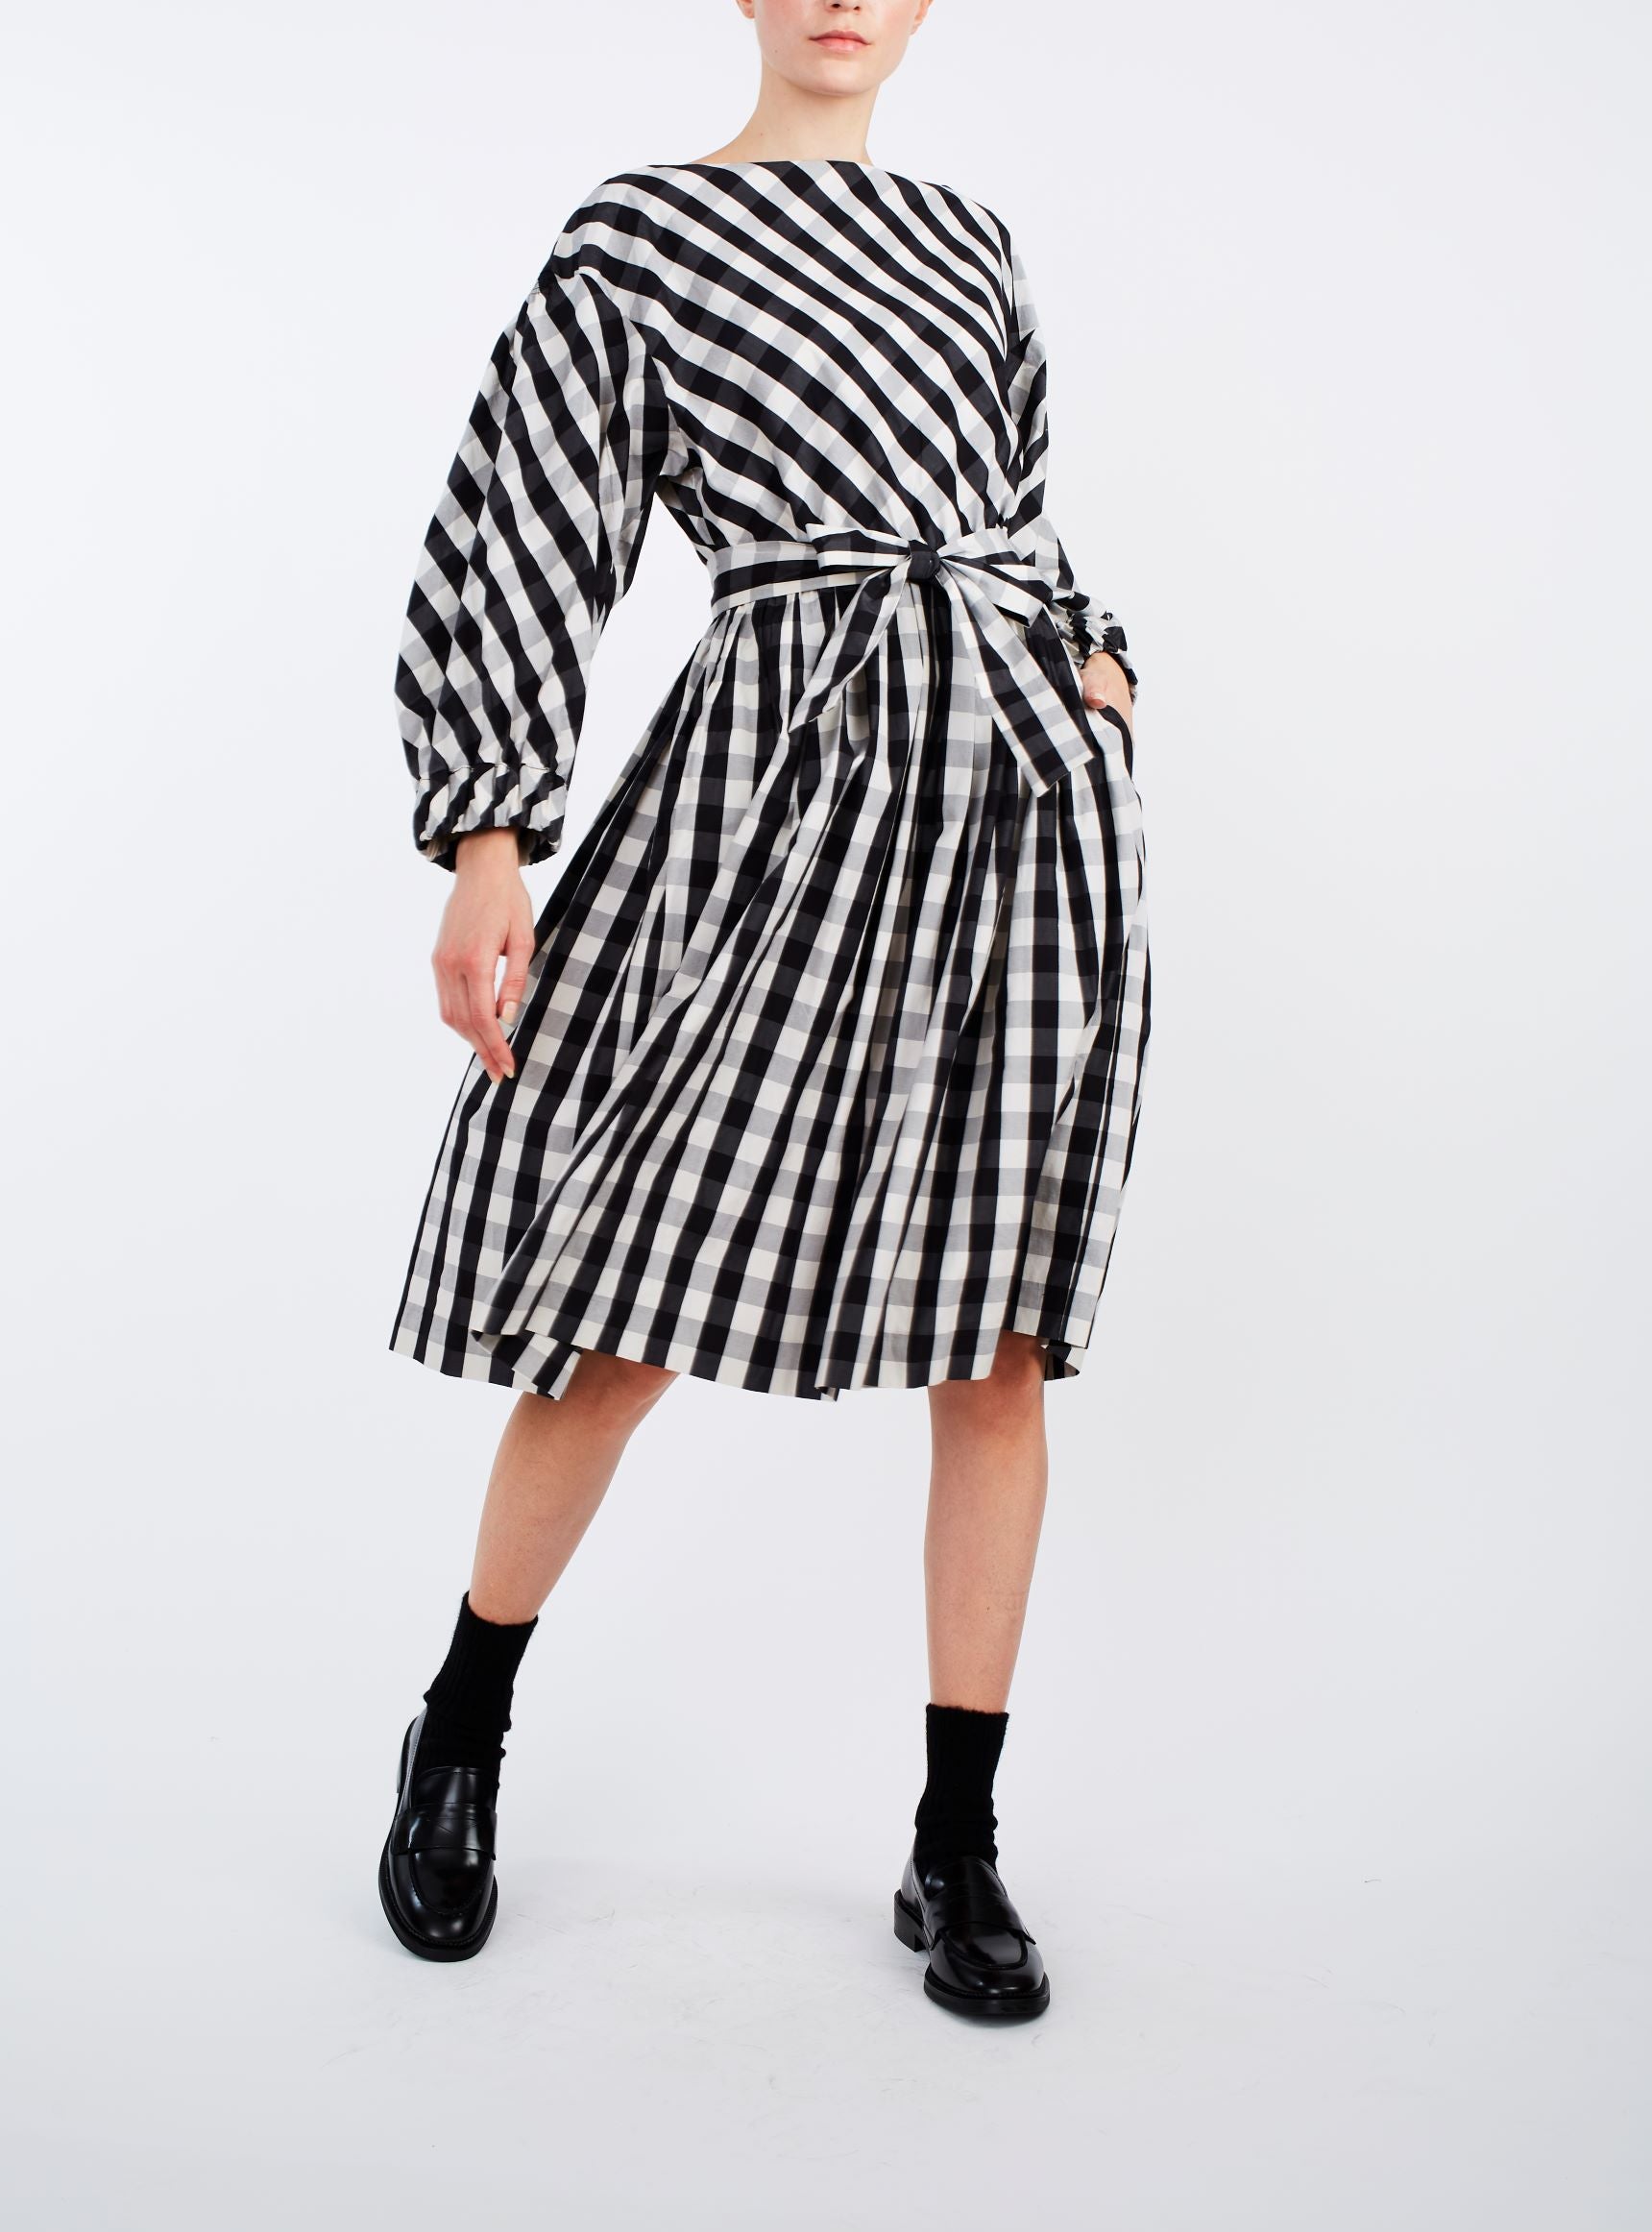 Front view Jane Black & White Cotton Dress by Thierry Colson